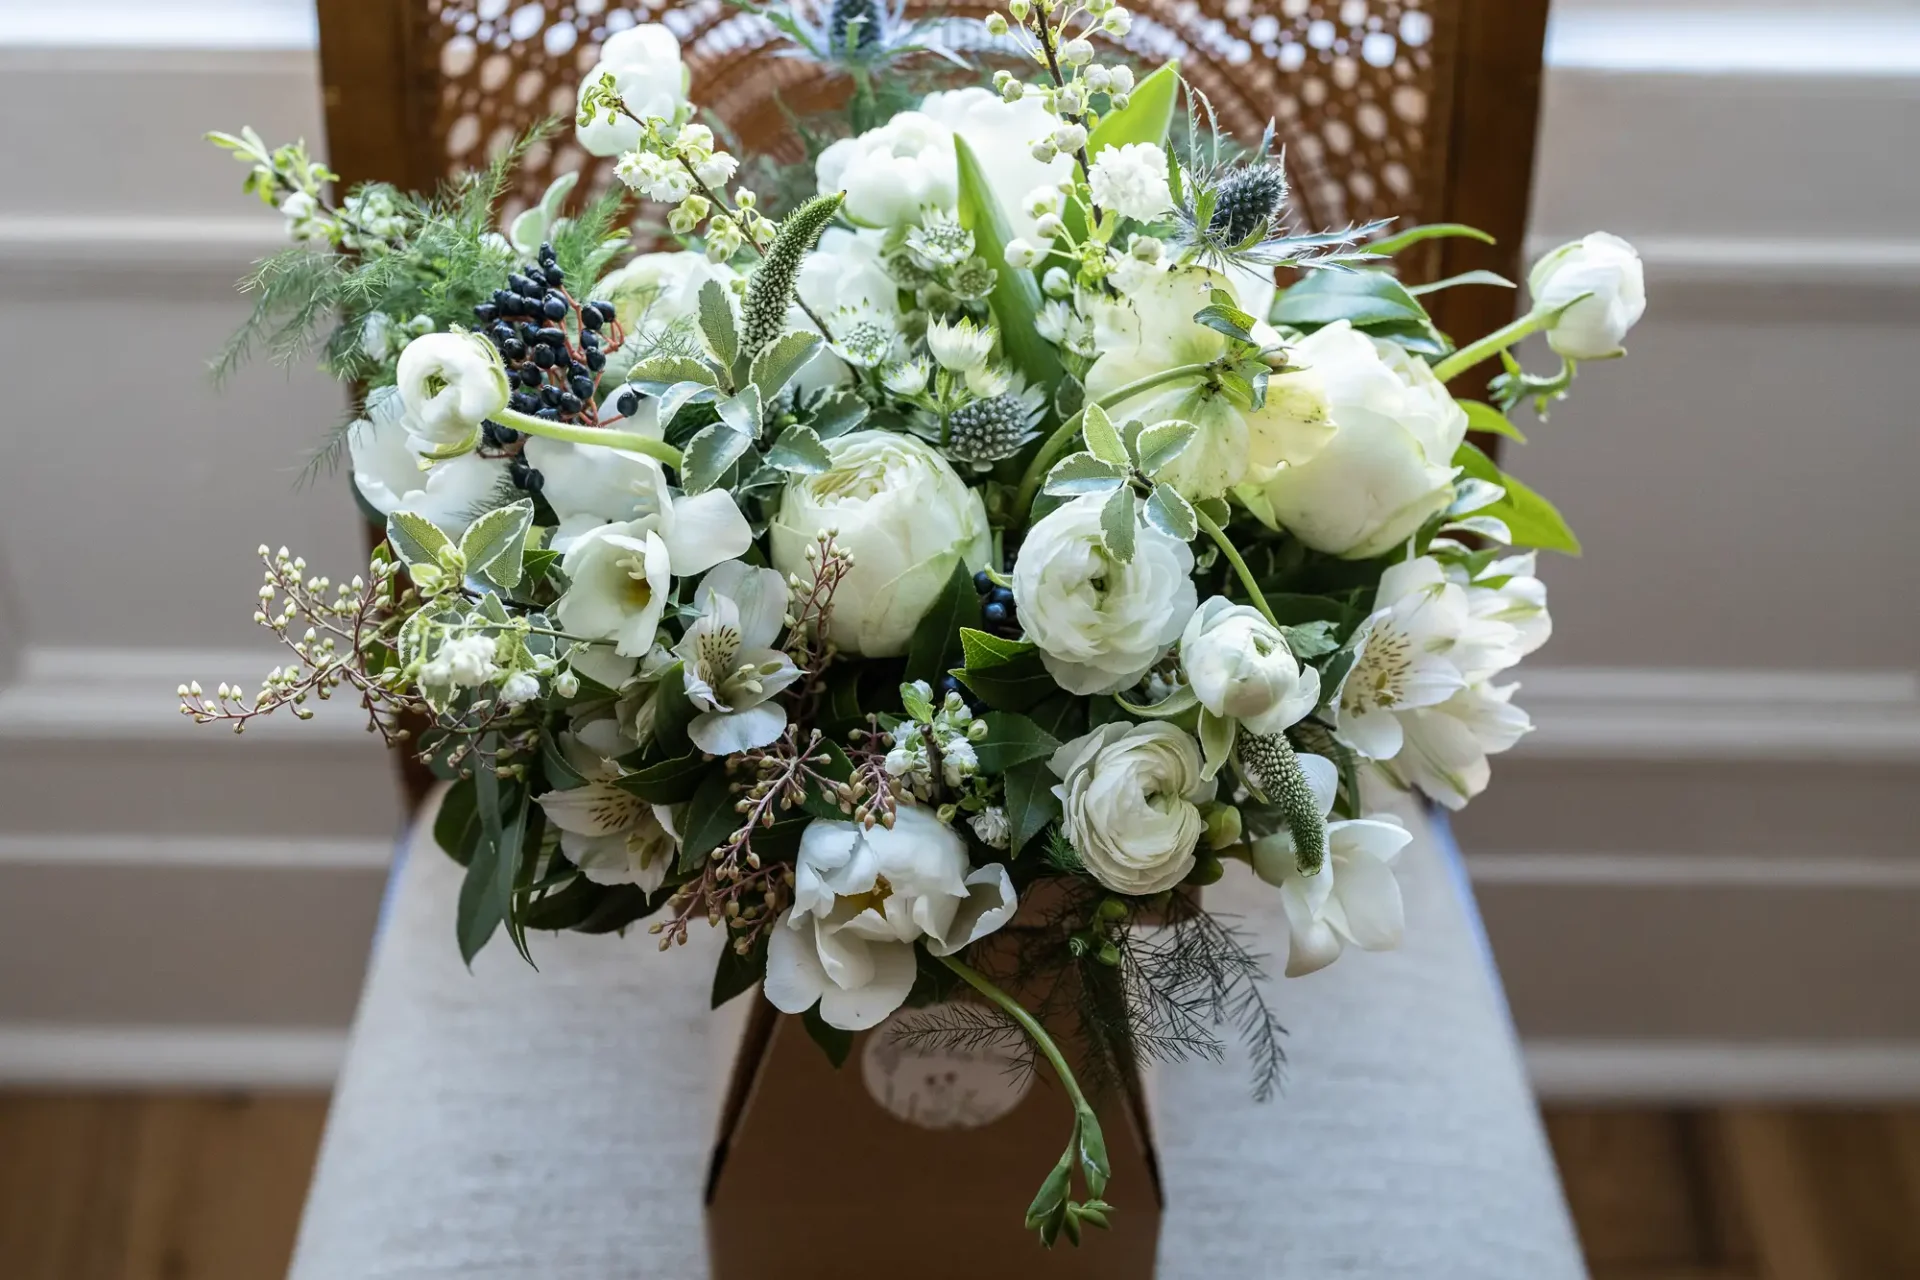 A floral bouquet with white roses, green thistles, and assorted greenery rests on a person's lap against a chair background.